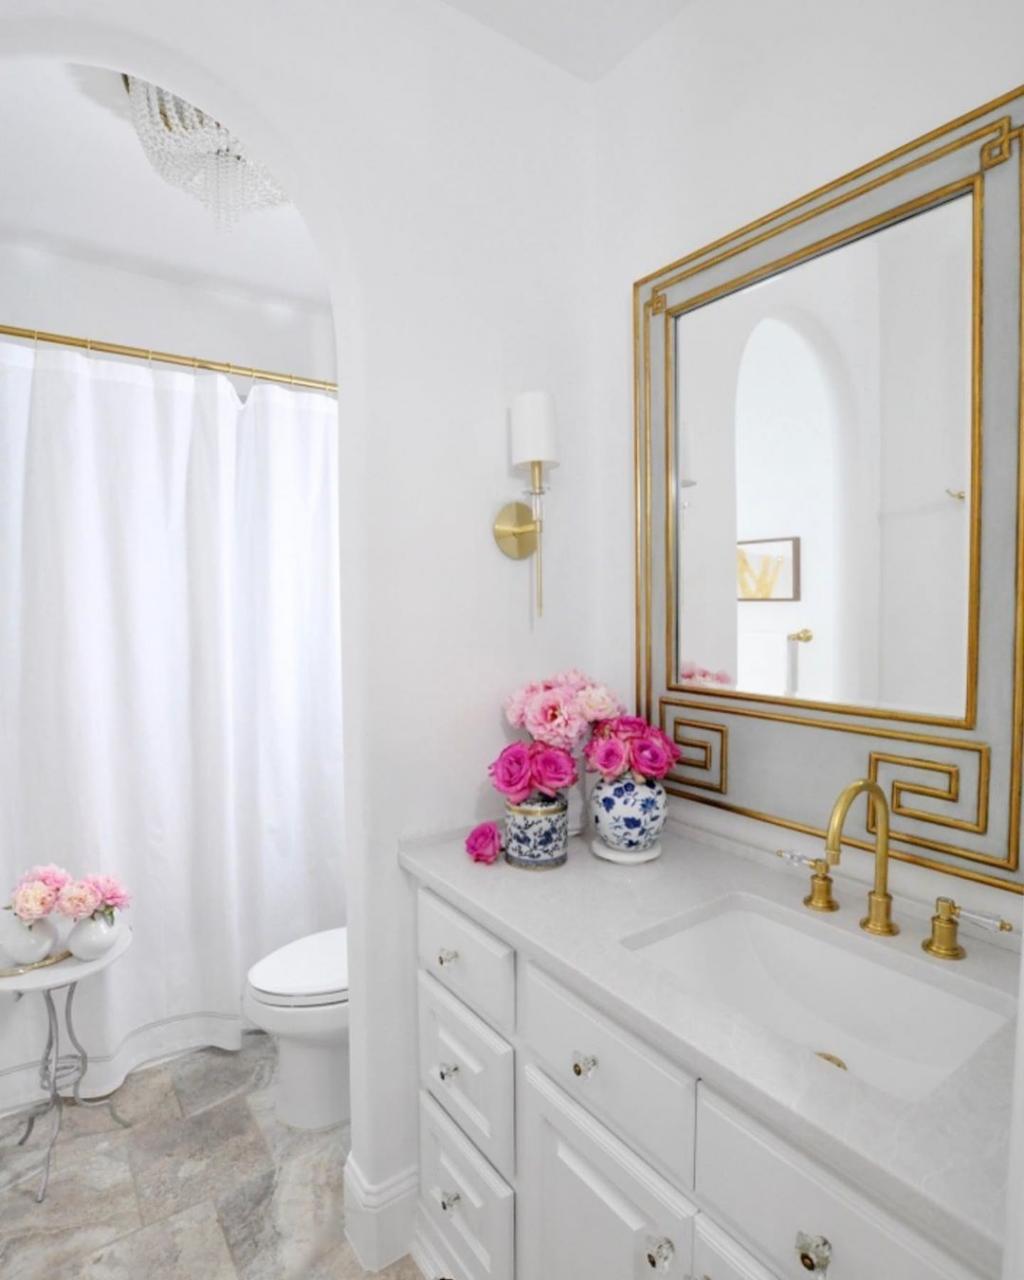 10 Best Glam Bathroom Decor Ideas You'll Swoon Over in 2021 Glam